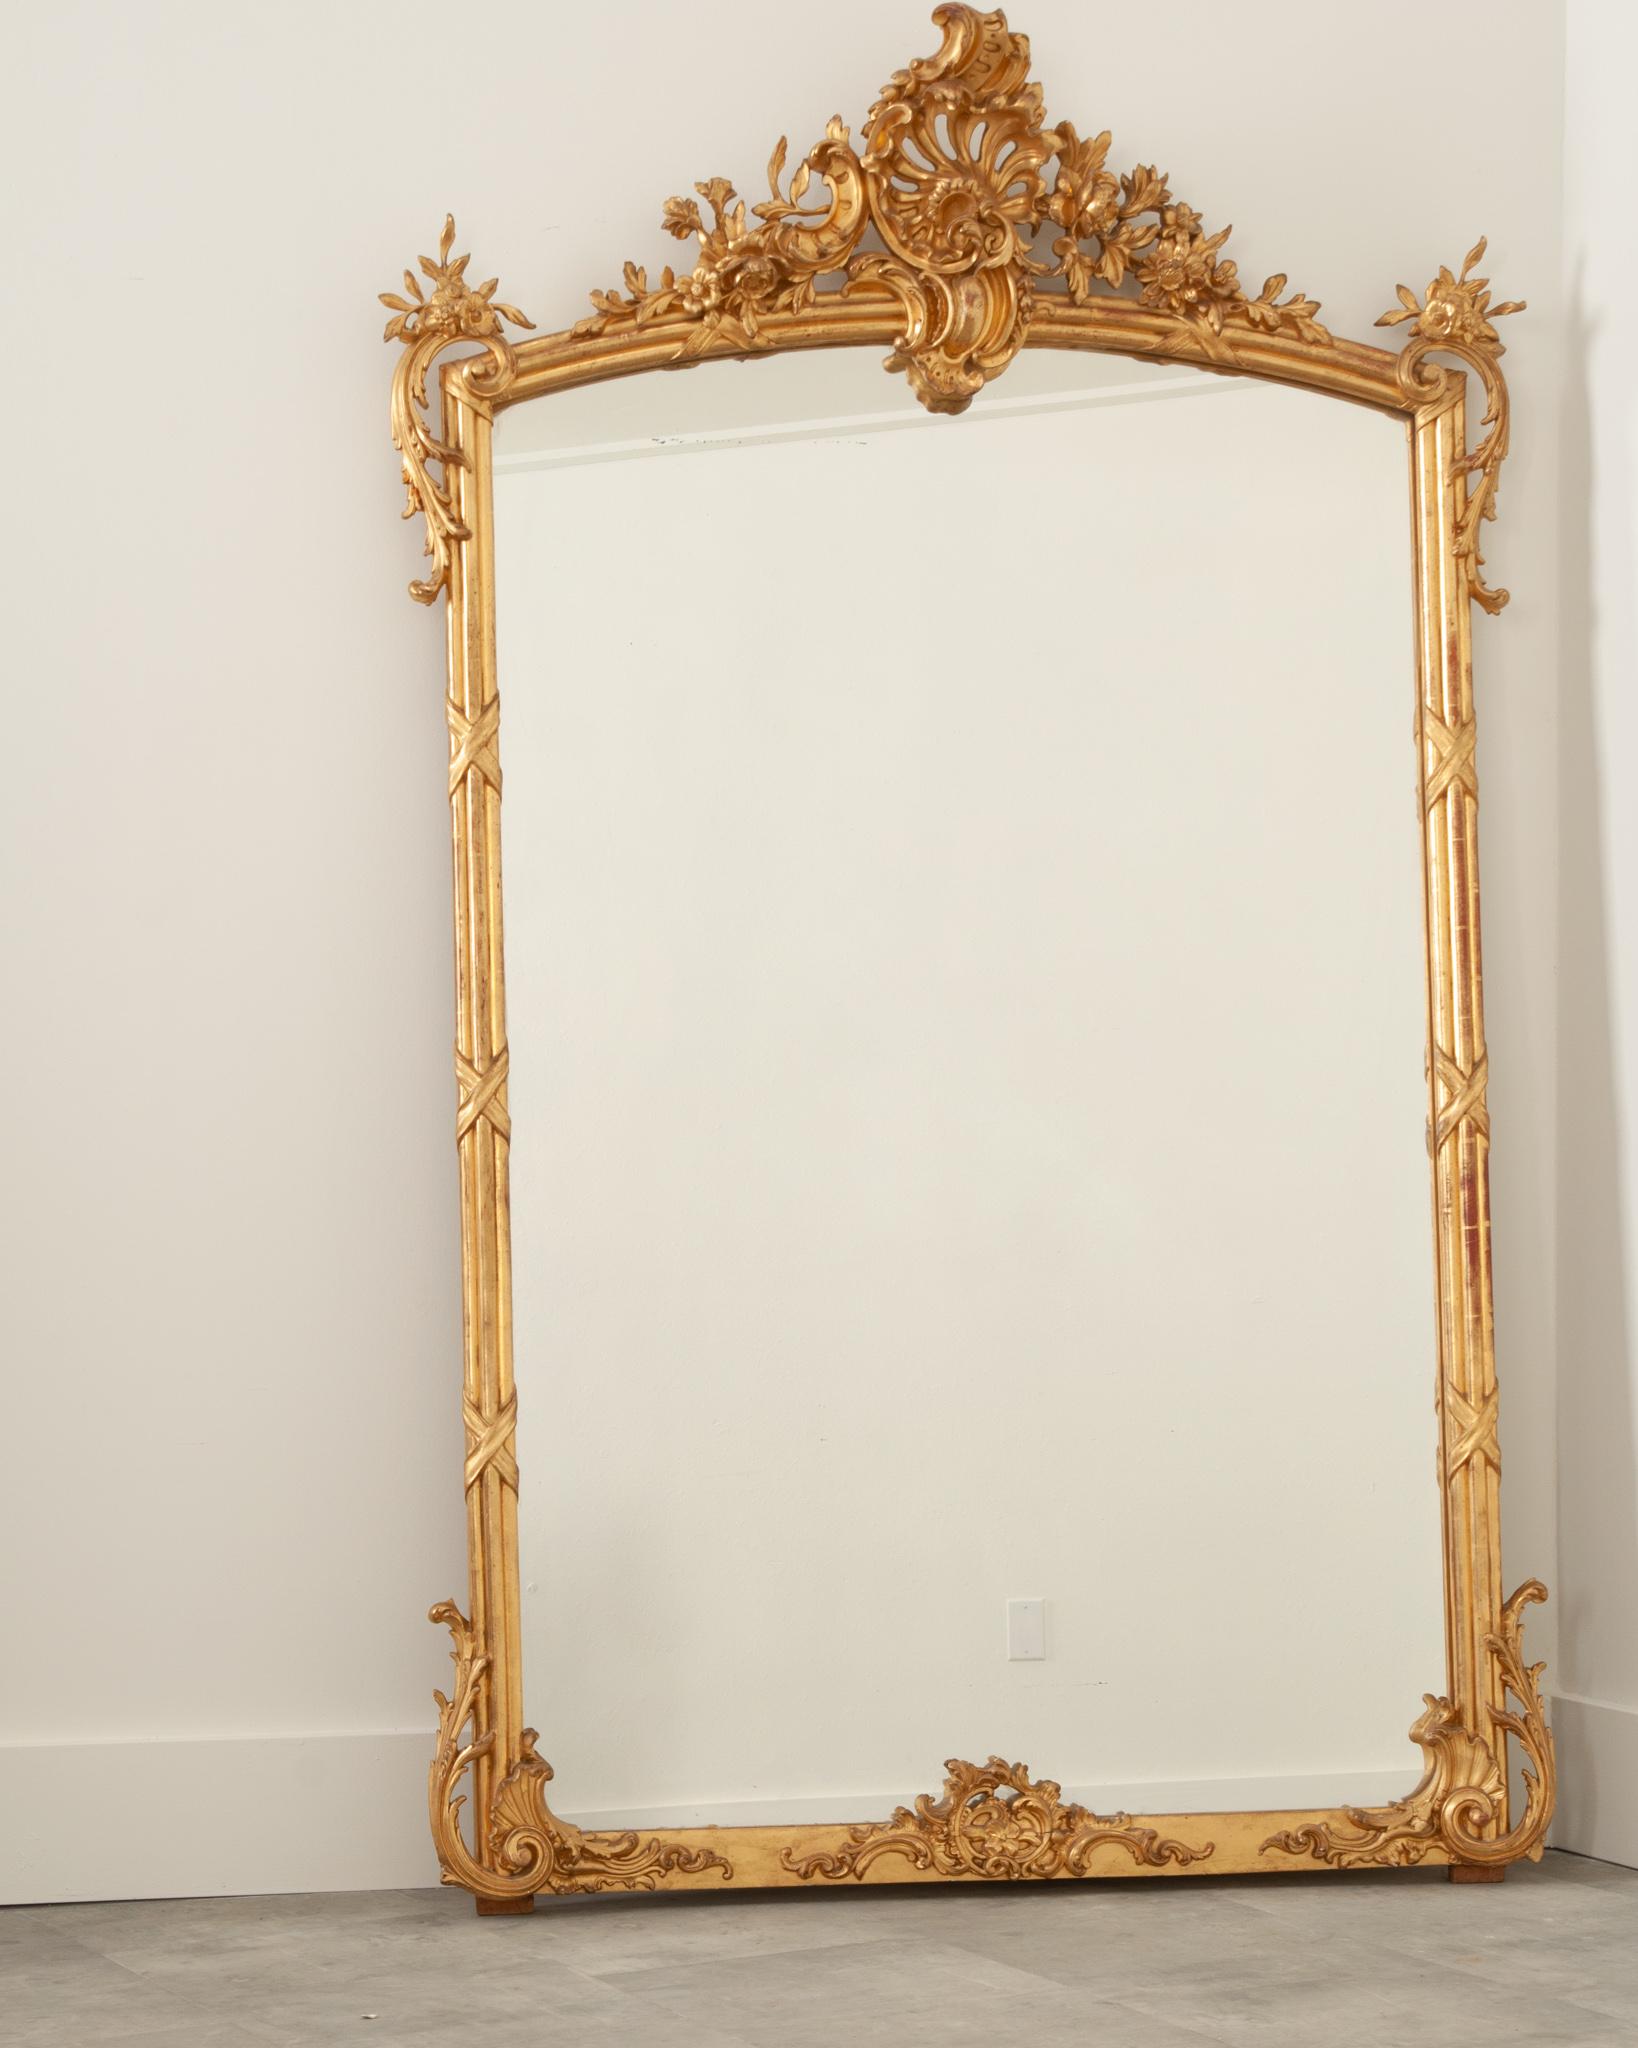 A stunning French mantle mirror covered in carved details and its original water gilding finish. At the top of this Louis XV style mirror is the iconic C scroll of Rococo design surrounded in floral carvings that dance beyond the frame of the